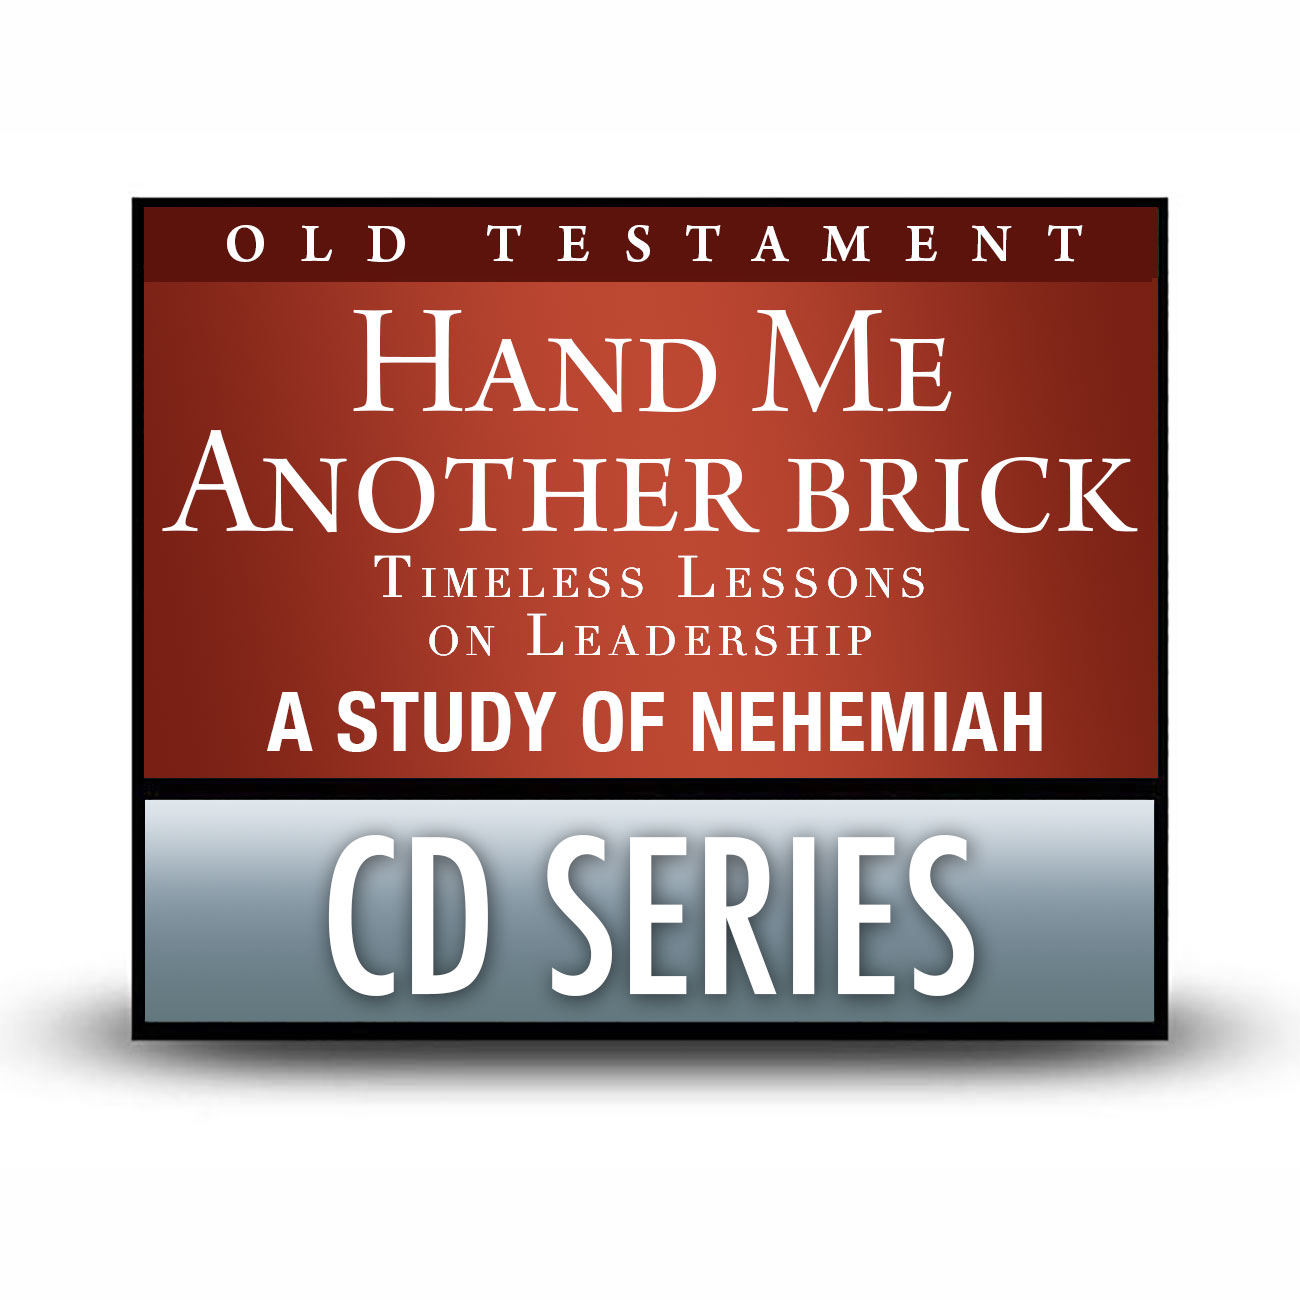 Hand Me Another Brick: Timeless Lessons on Leadership (Nehemiah) - A Signature Series